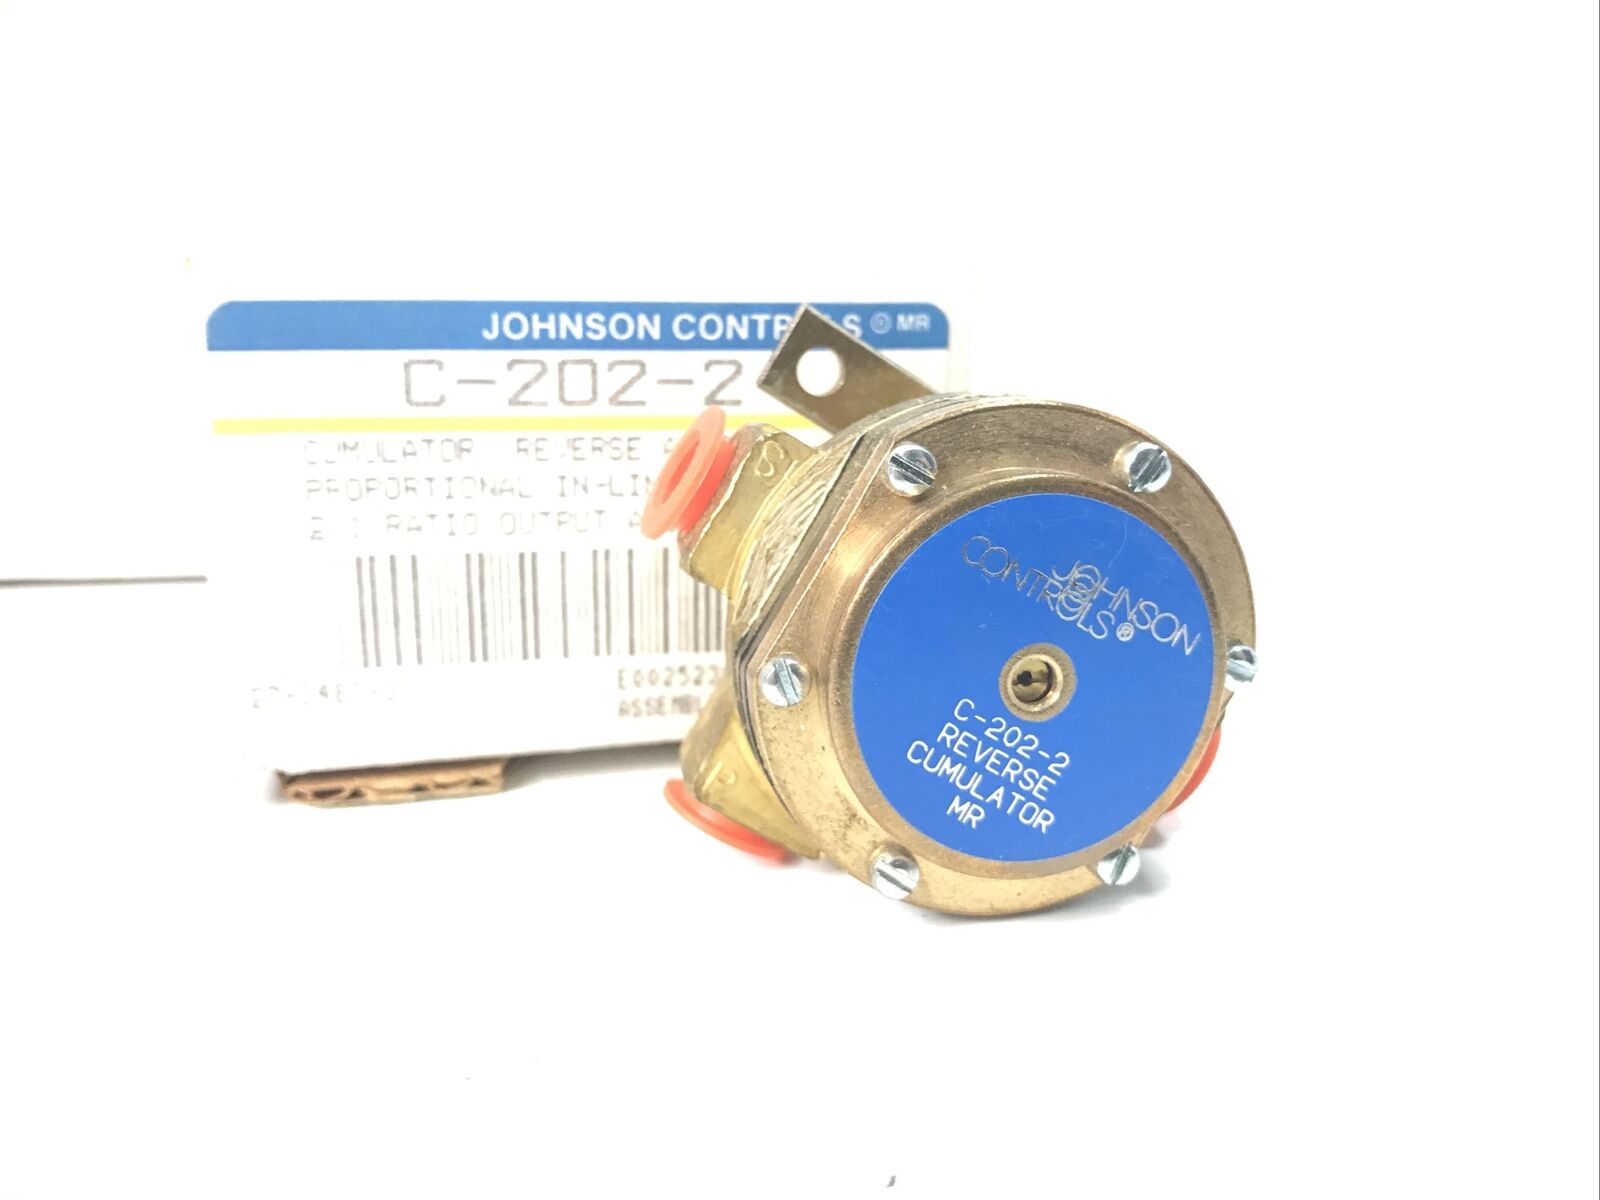 JOHNSON CONTROLS C-202-2 Reverse Action Cumulator Proportional In-Line